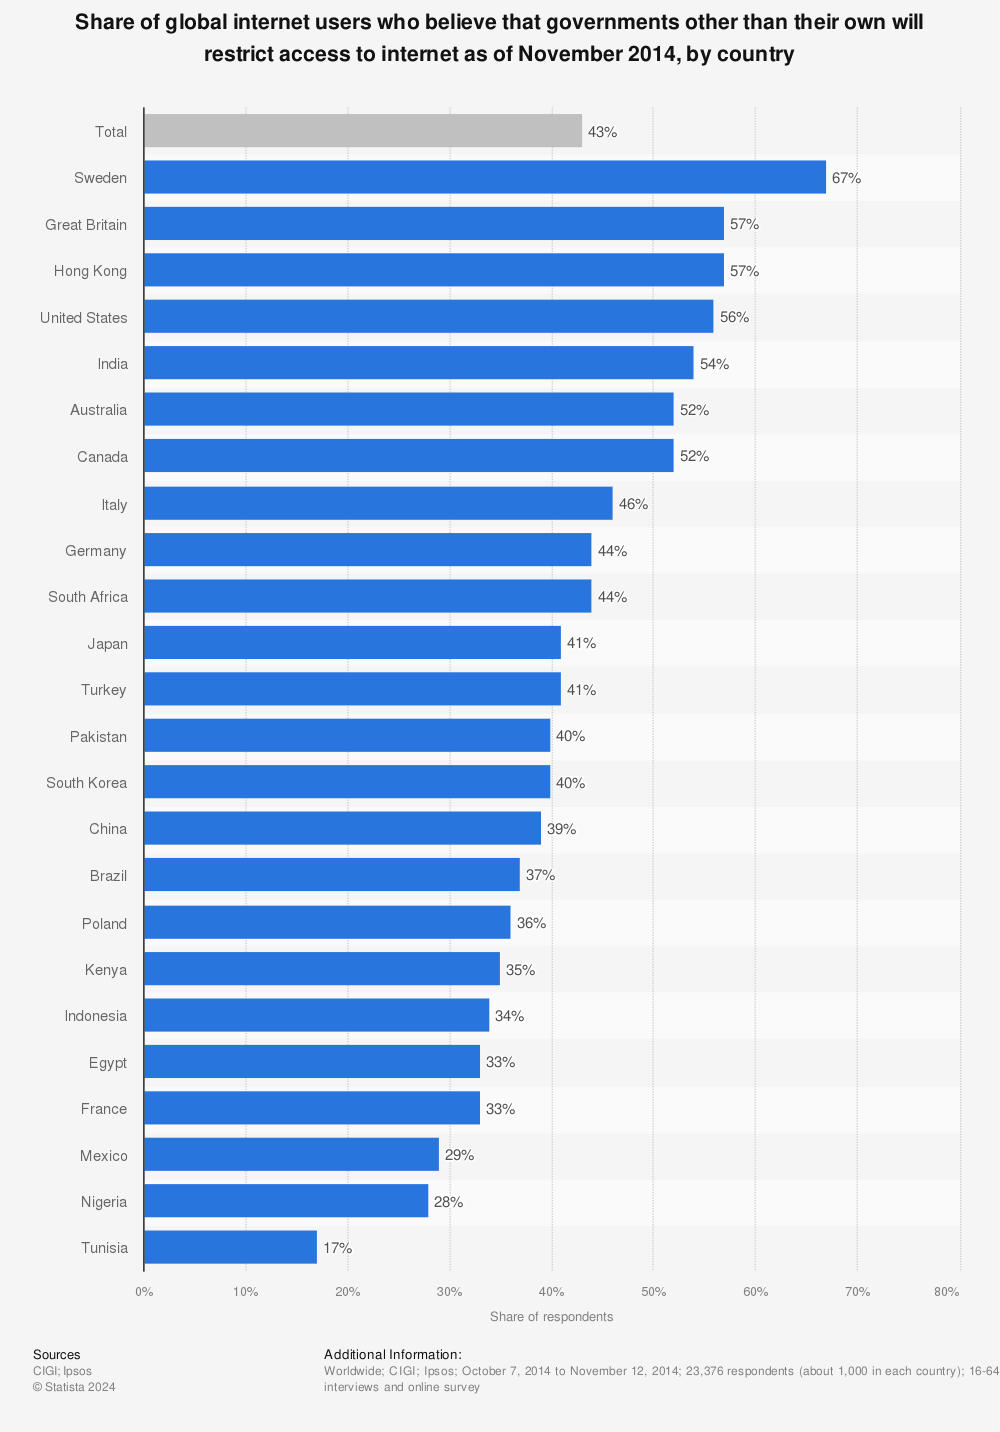 Statistic: Share of global internet users who believe that governments other than their own will restrict access to internet as of November 2014, by country | Statista